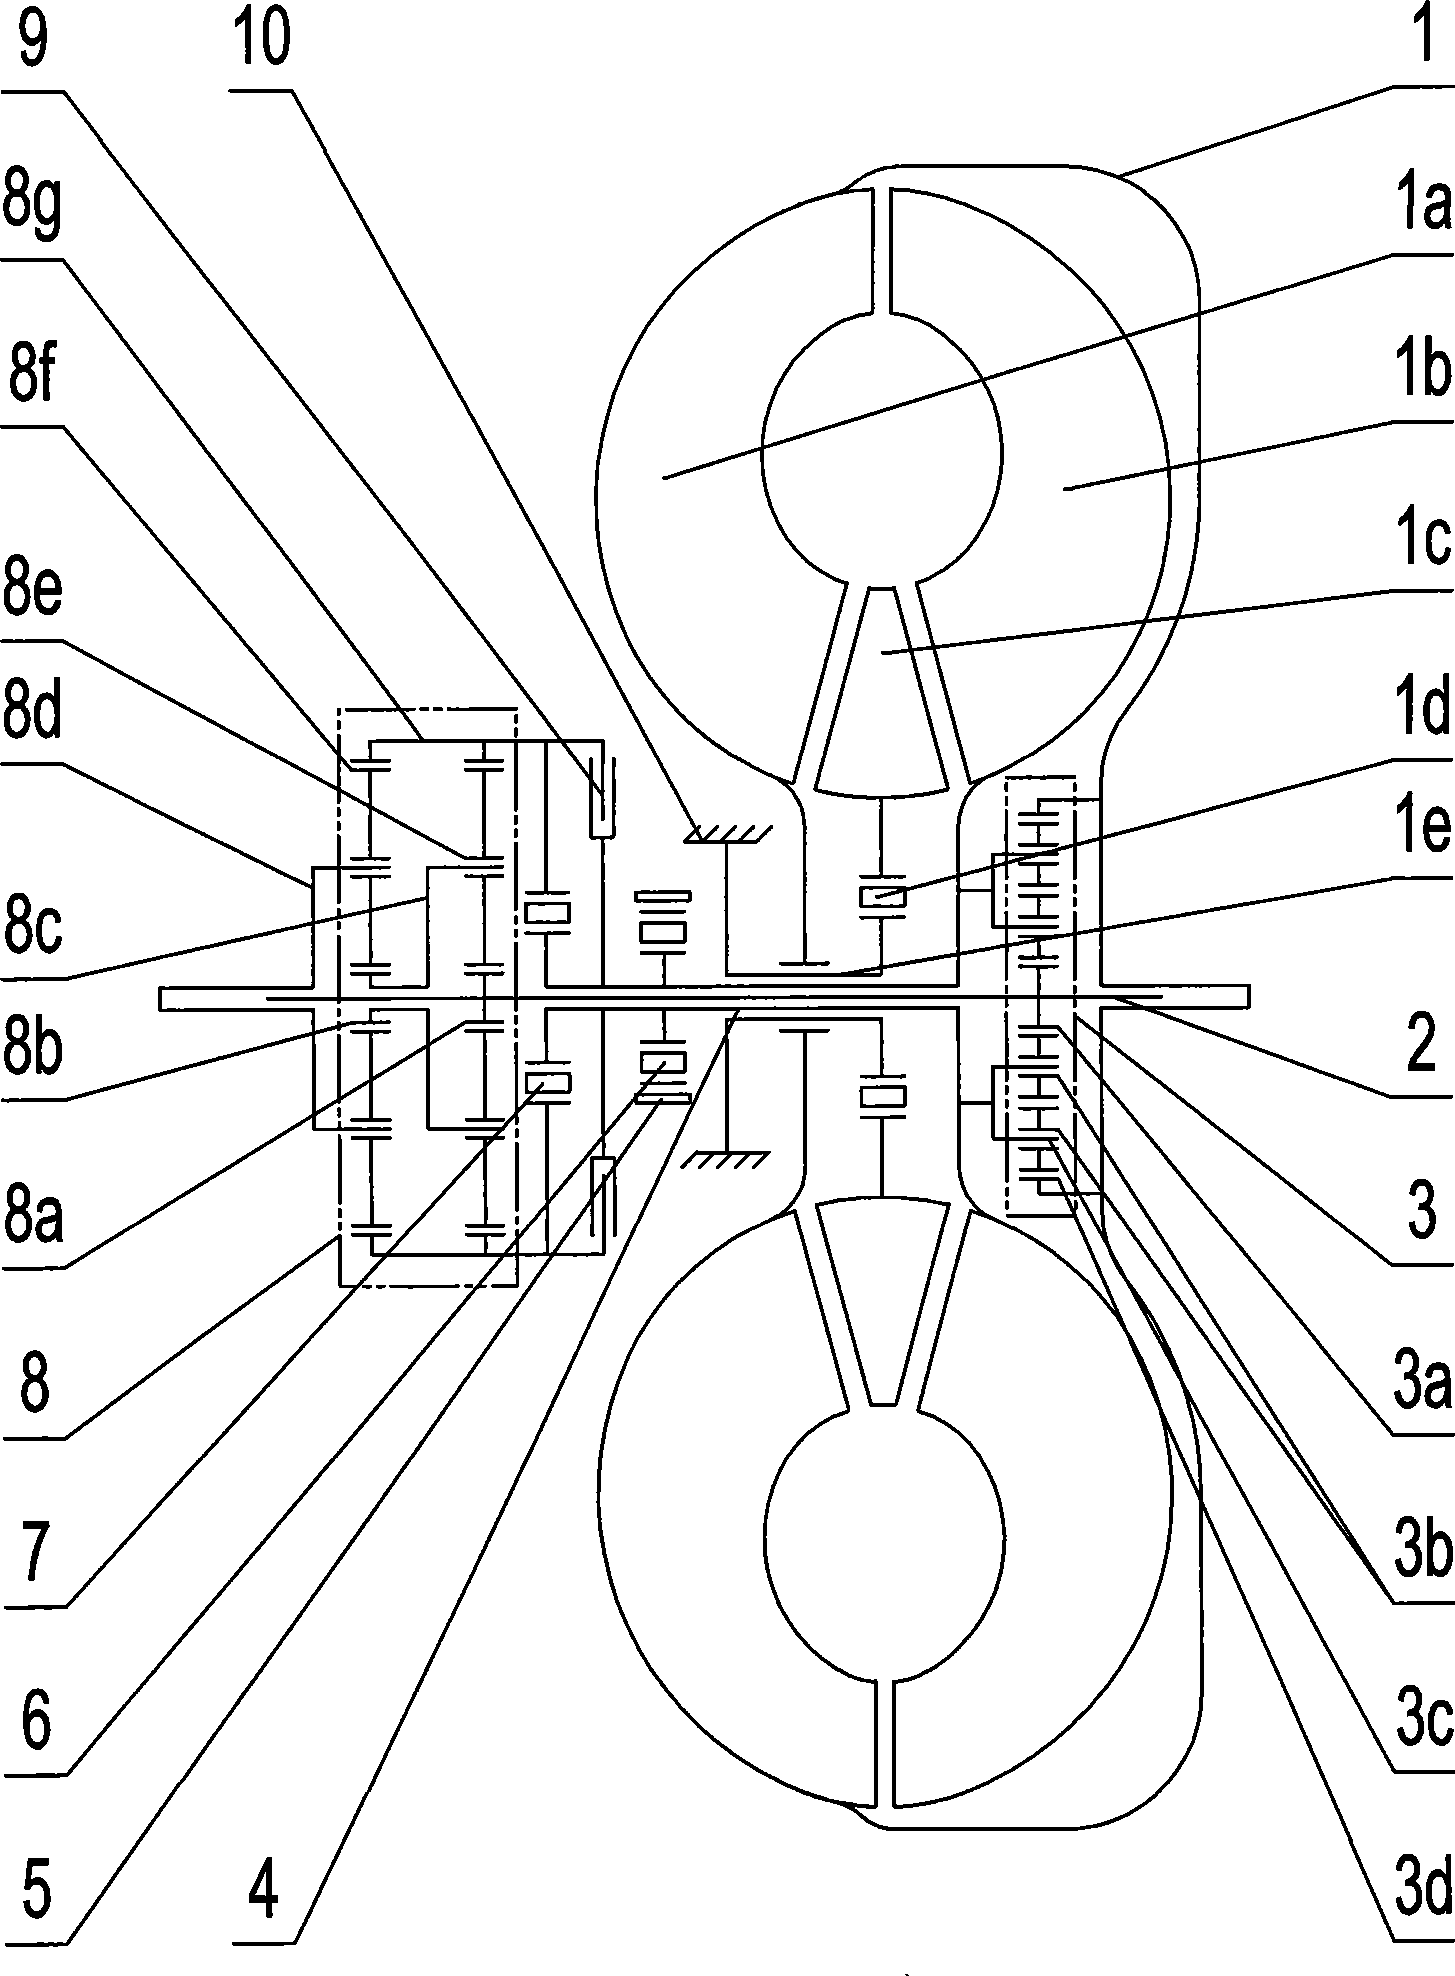 Self-coupling continuously variable transmission